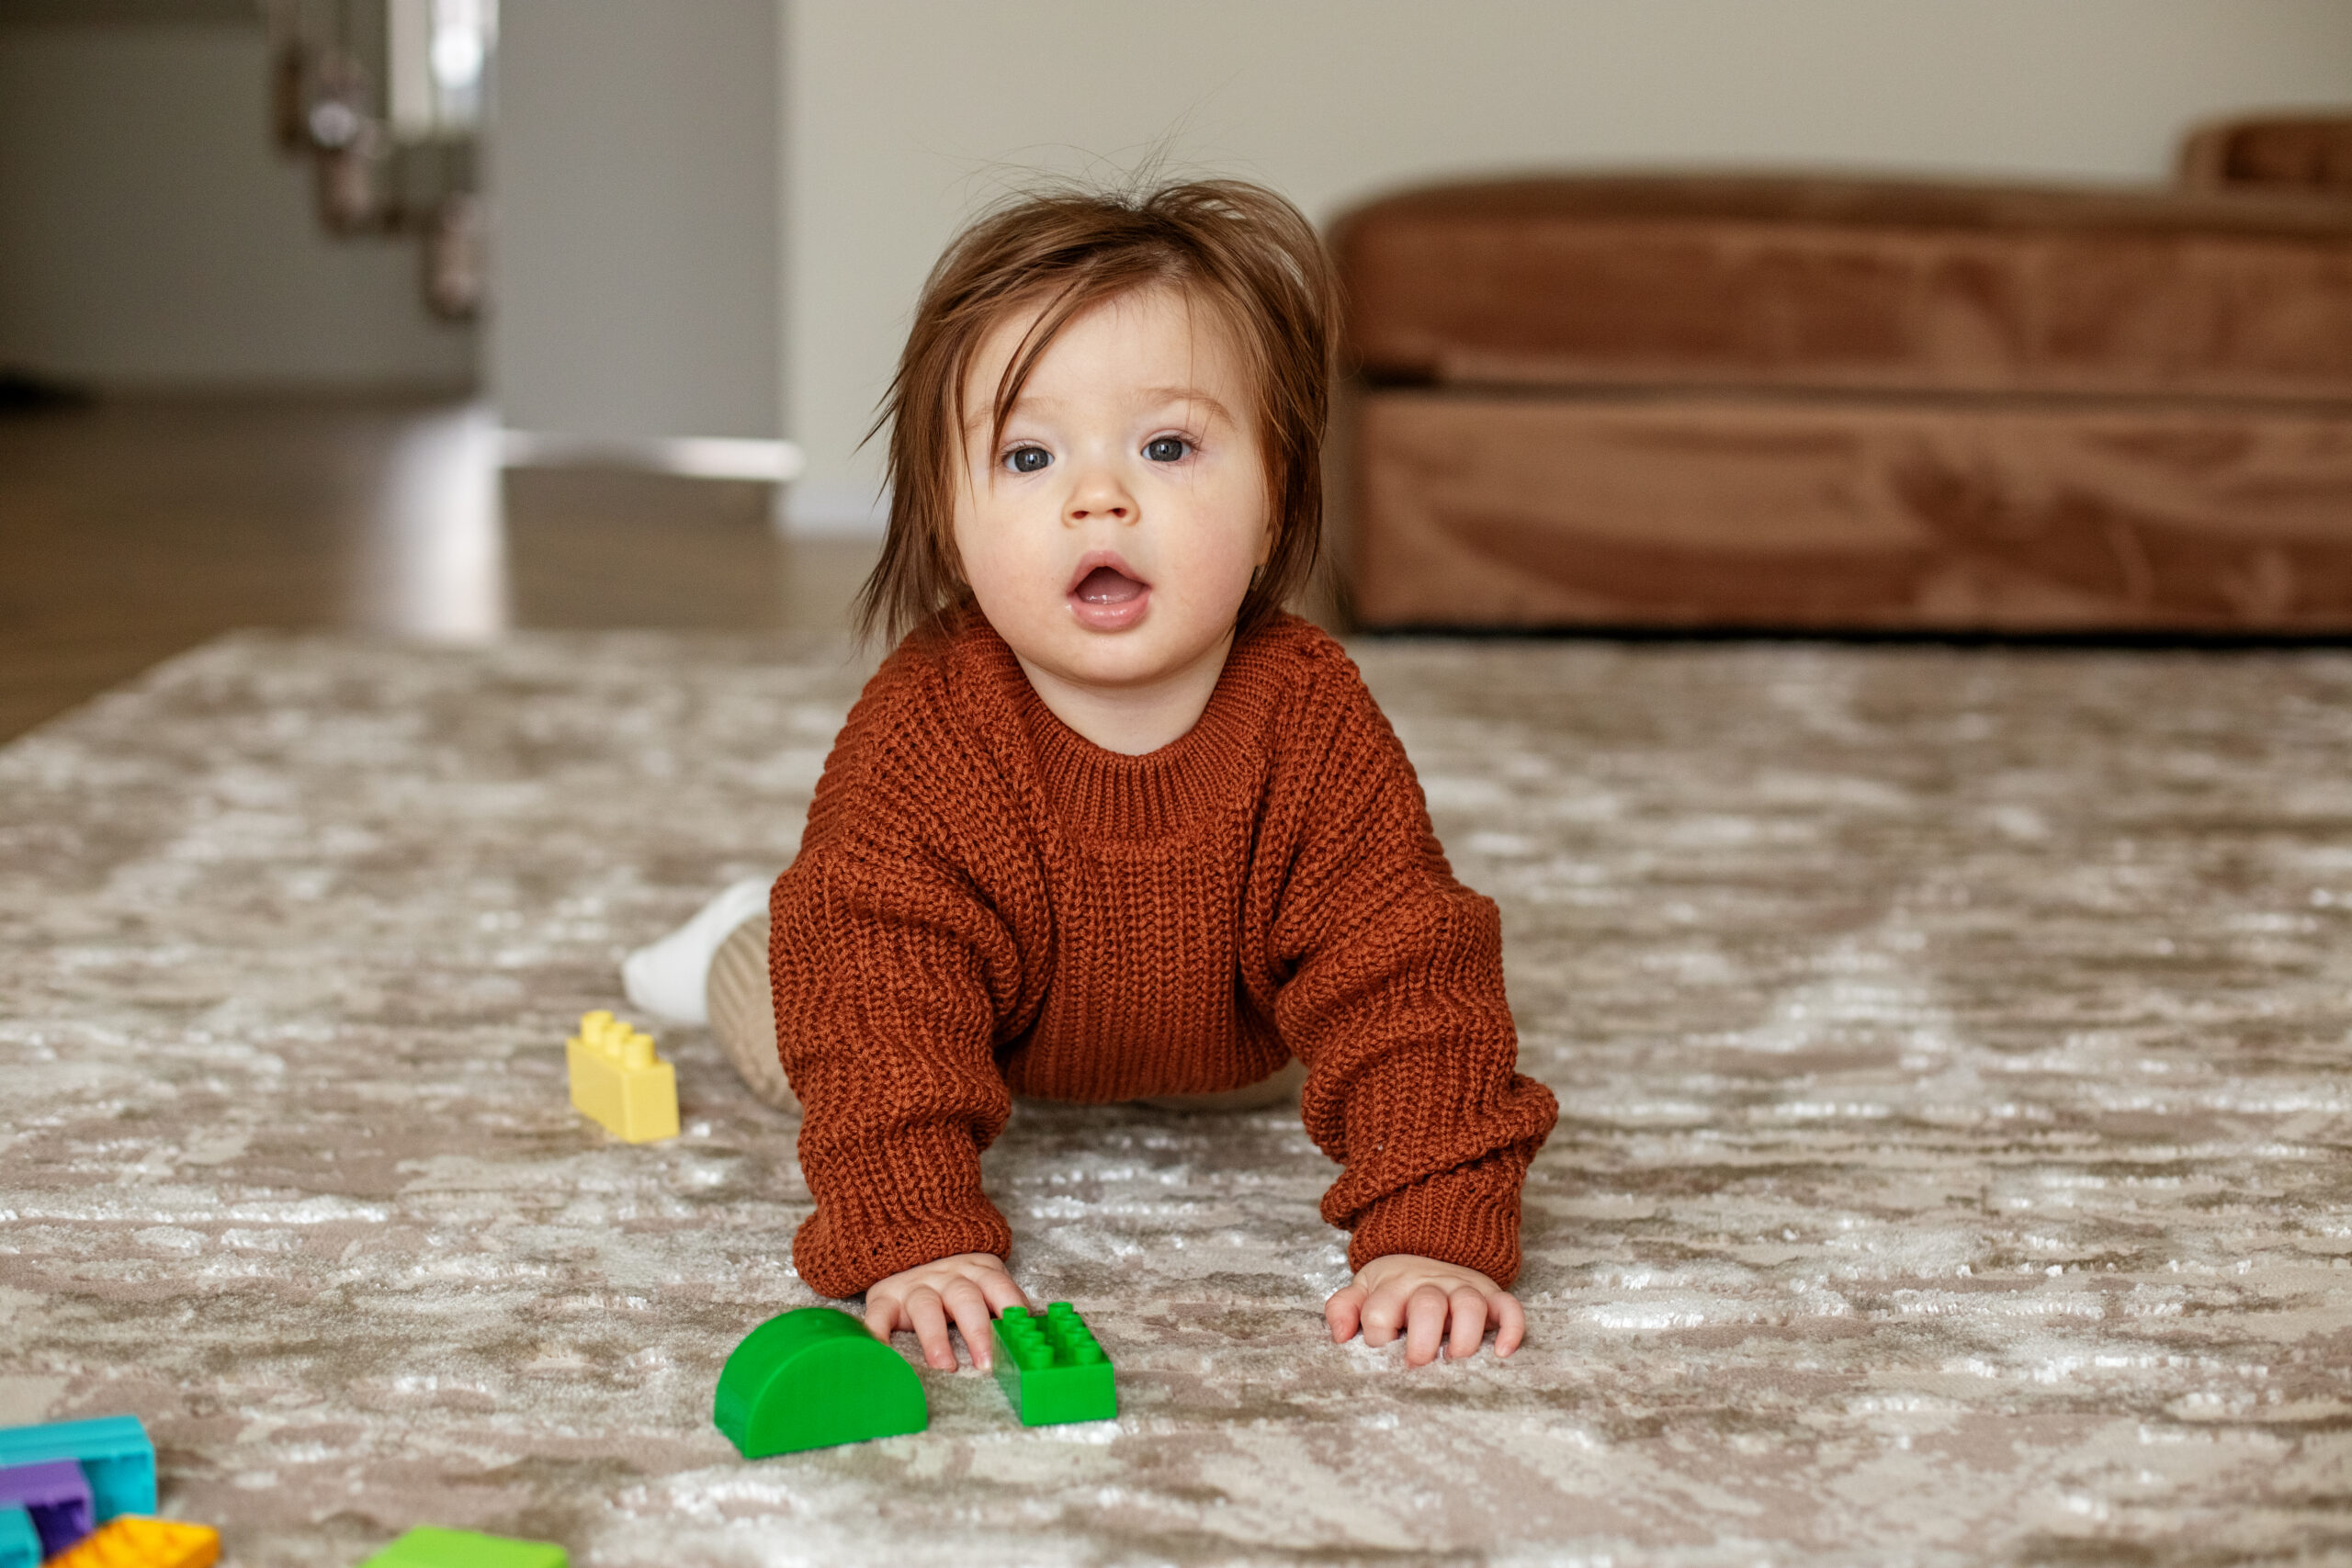 cute baby girl crawling on floor at home playing 2022 04 05 00 27 40 utc scaled